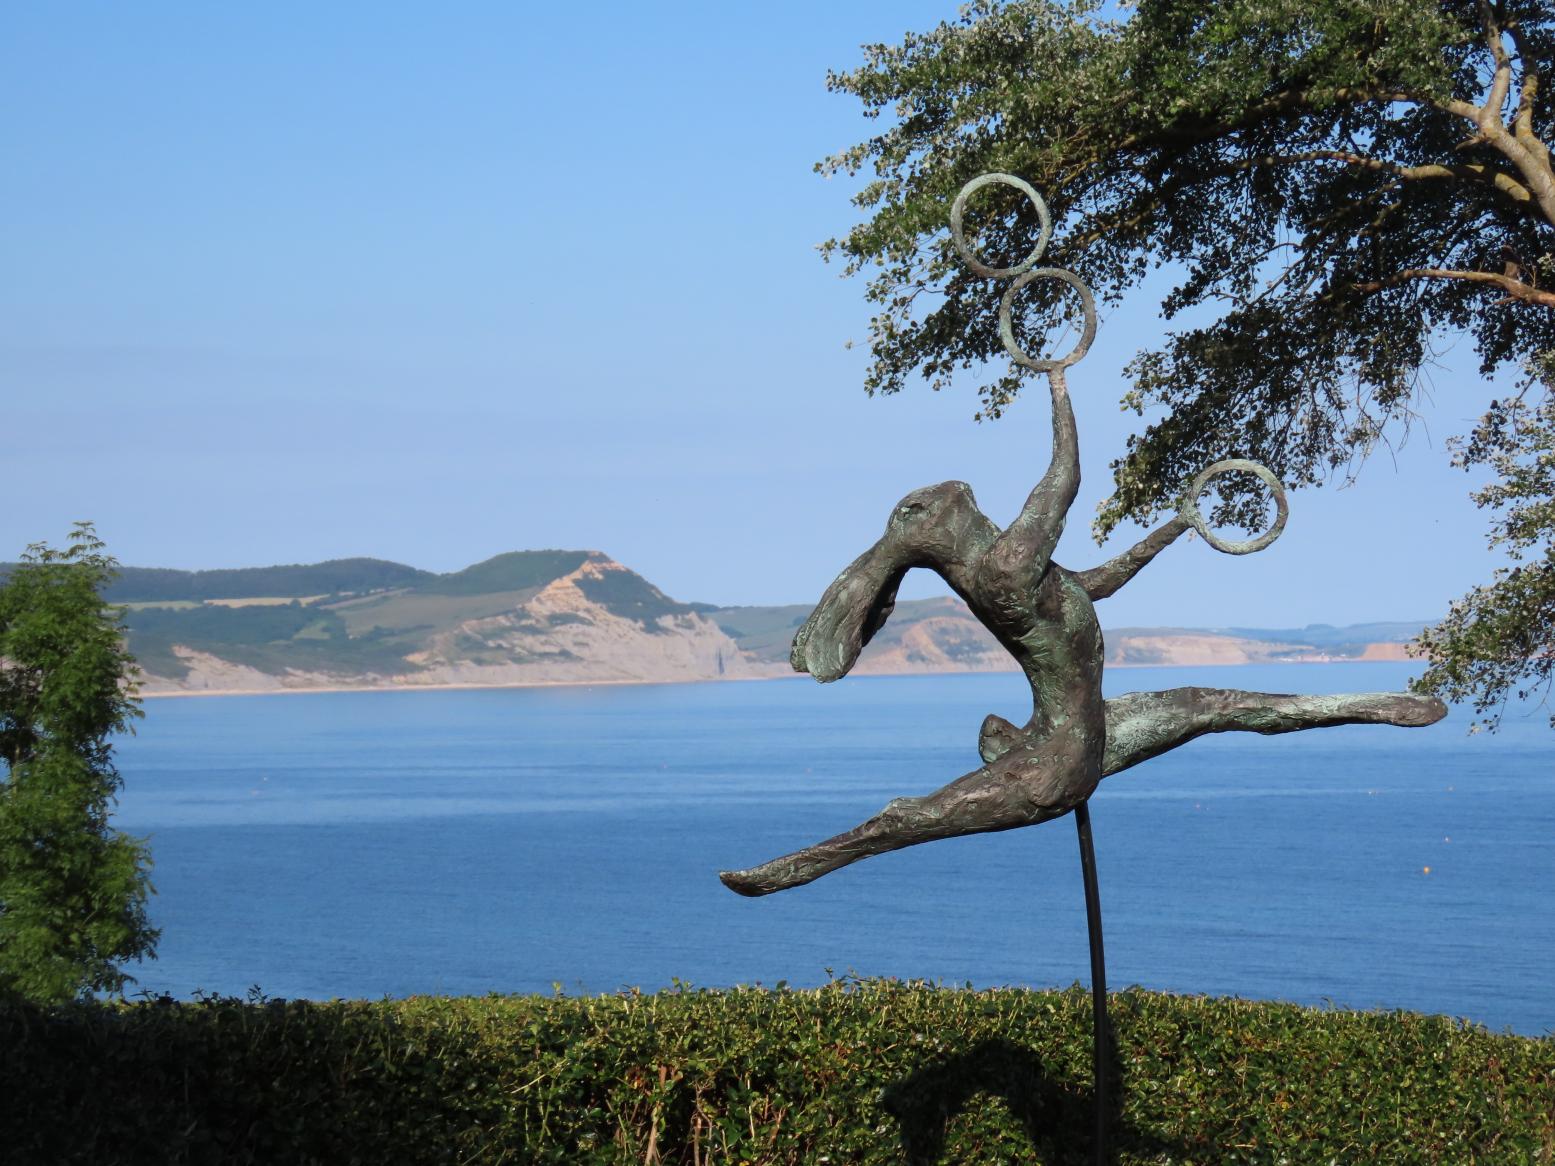 Juggler by Clare Trenchard, part of the Sculpture Trail in Langmoor Gardens, Lyme Regis